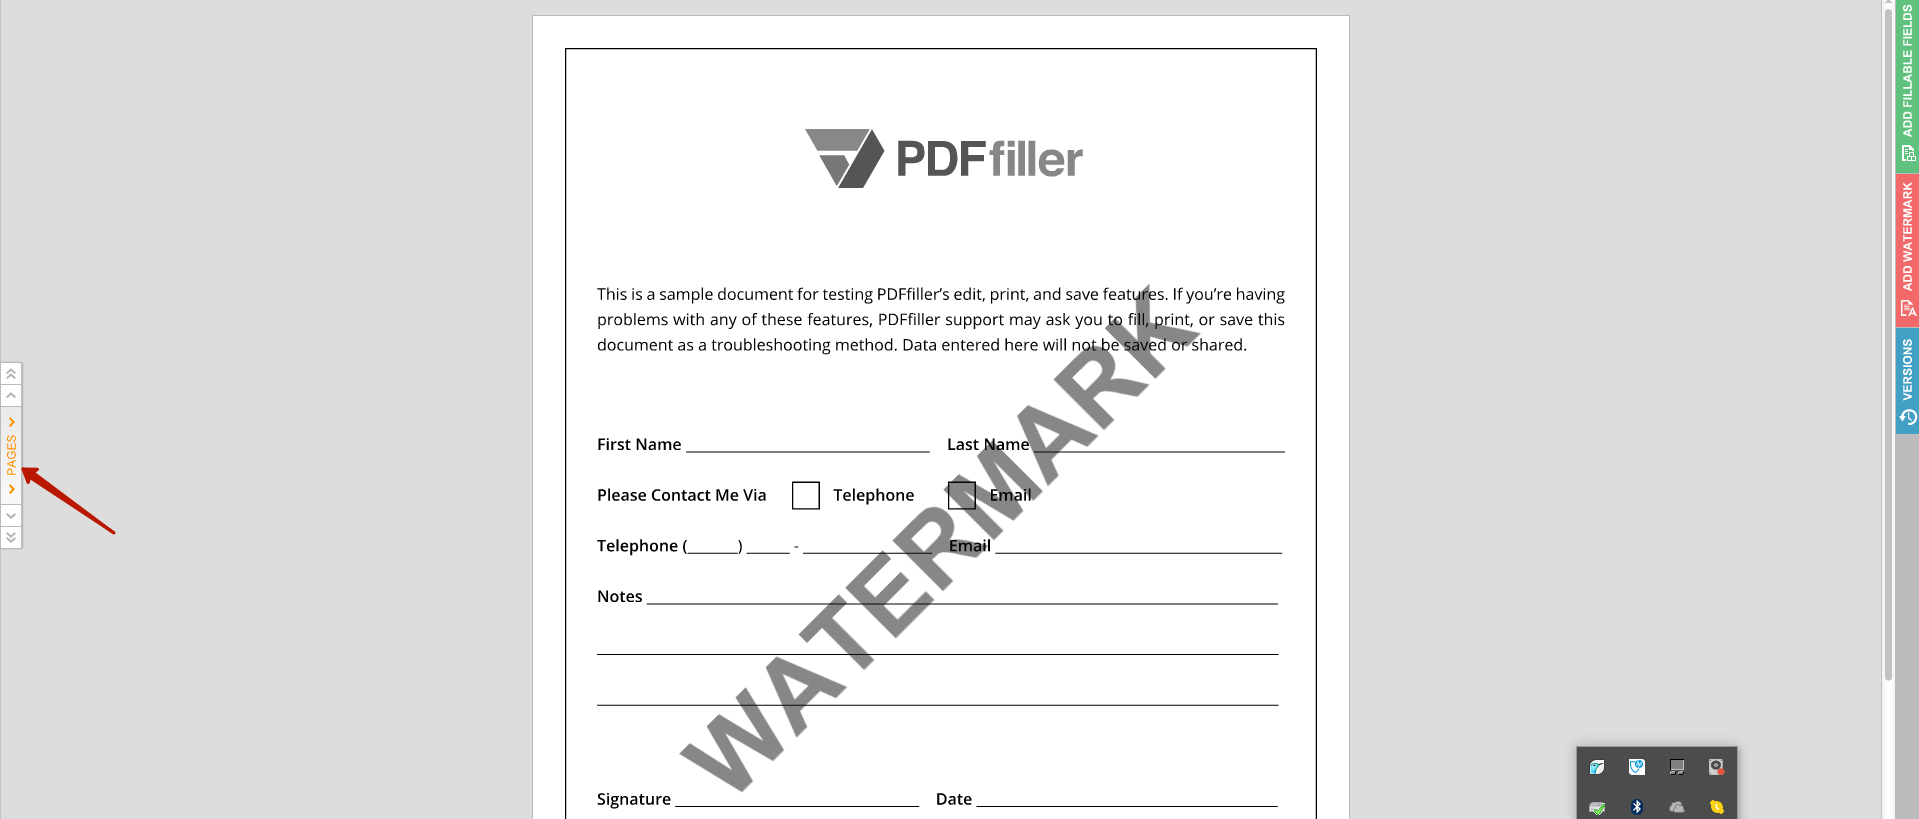 pdf rotate pages